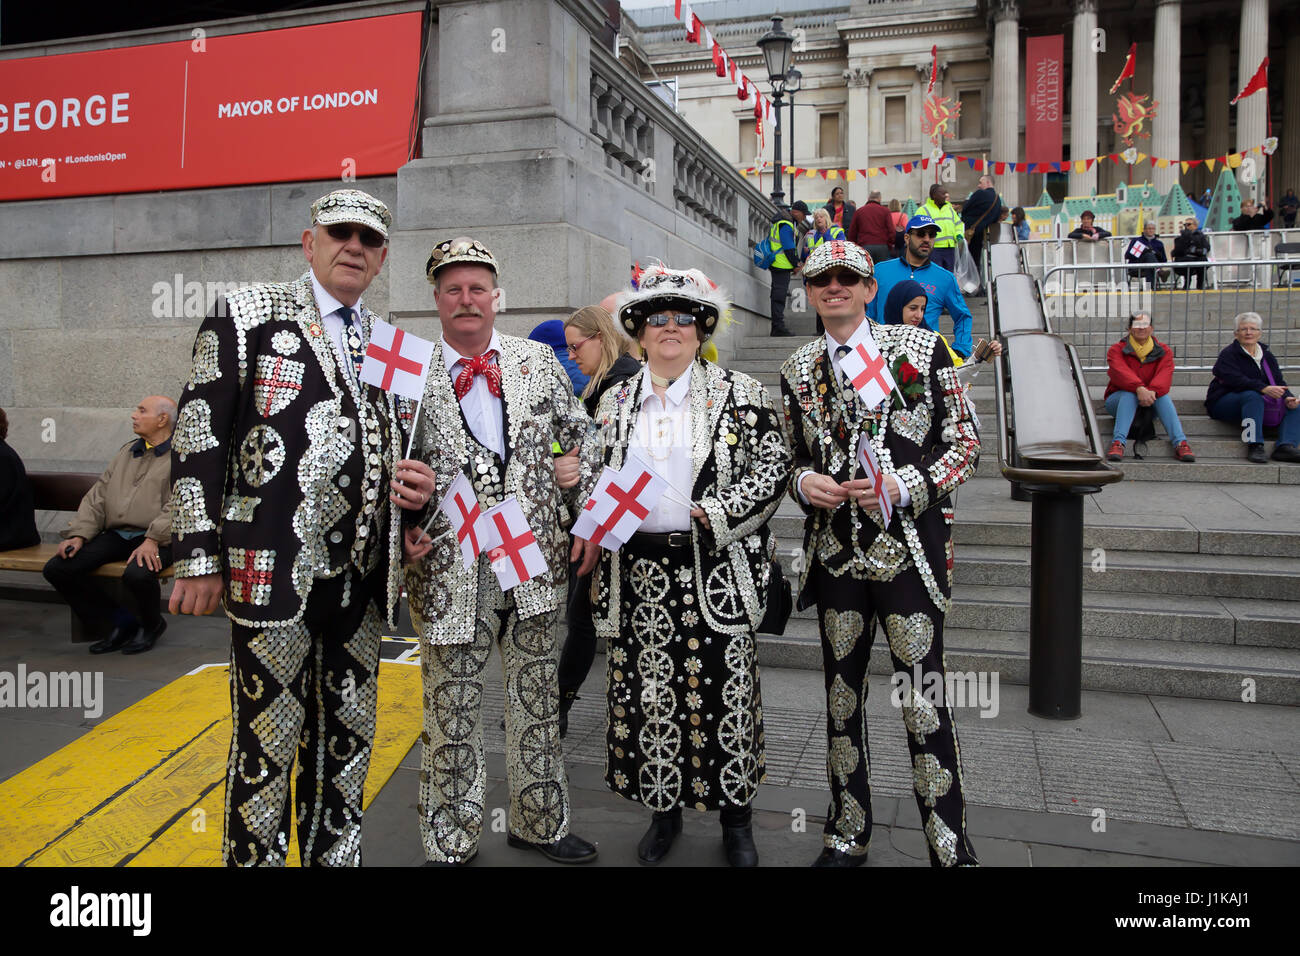 Trafalgar Square,UK,22nd April 2017,Pearly Kings and Queens attend The Annual Feast of St George celebrations which took place in Trafalgar Square London attended by Sadiq Khan Mayor of London.There were free activities for children,food stalls and people dressed in costumes©Keith Larby/Alamy Live News Stock Photo